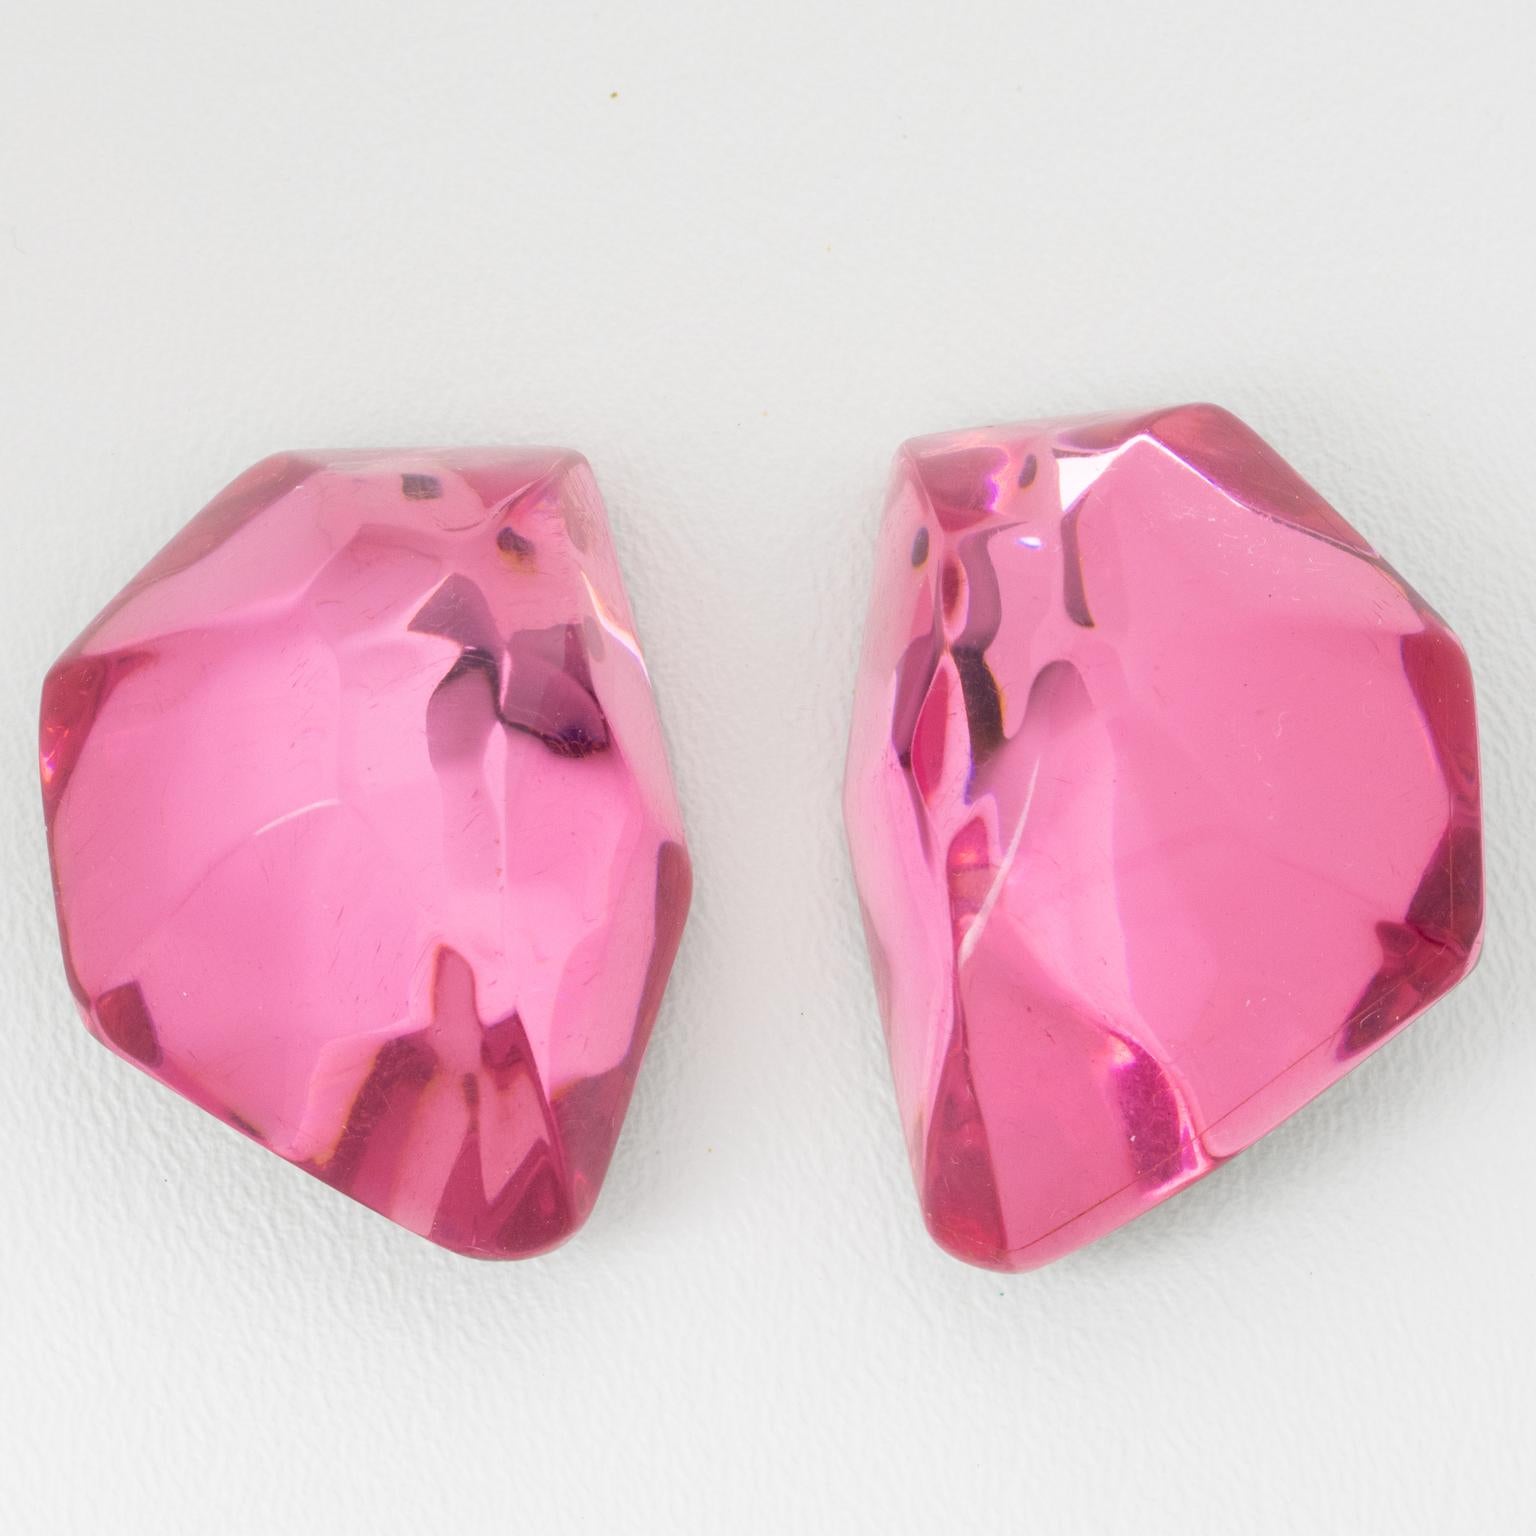 Kaso Giant Ice Cube Hit Pink Lucite Clip Earrings 3